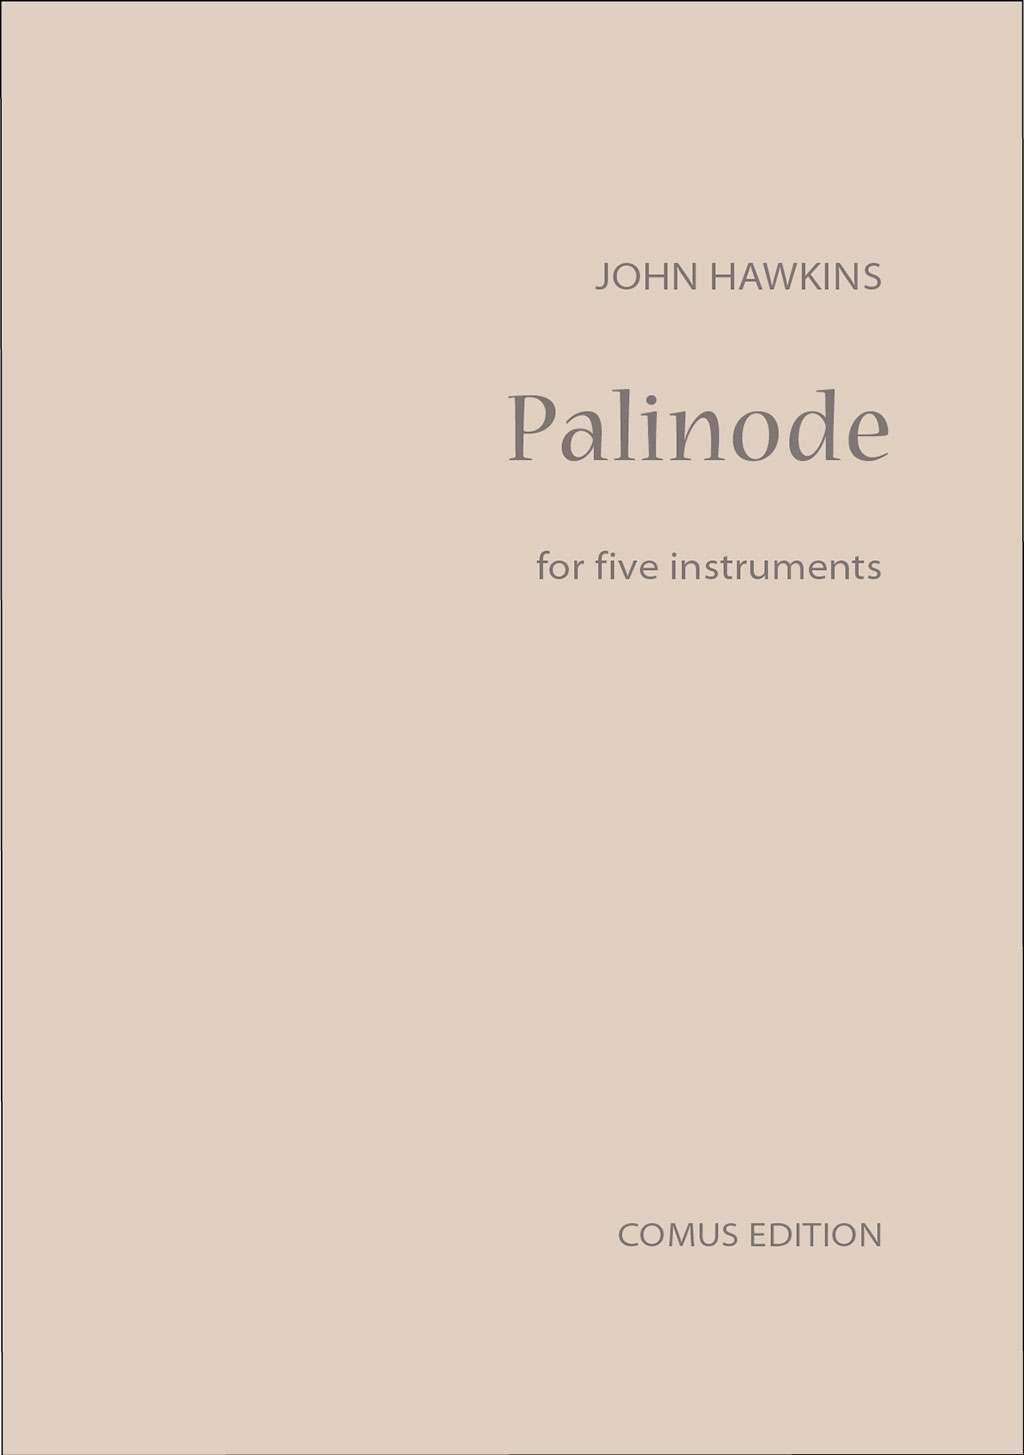 Outer cover of item Palinode